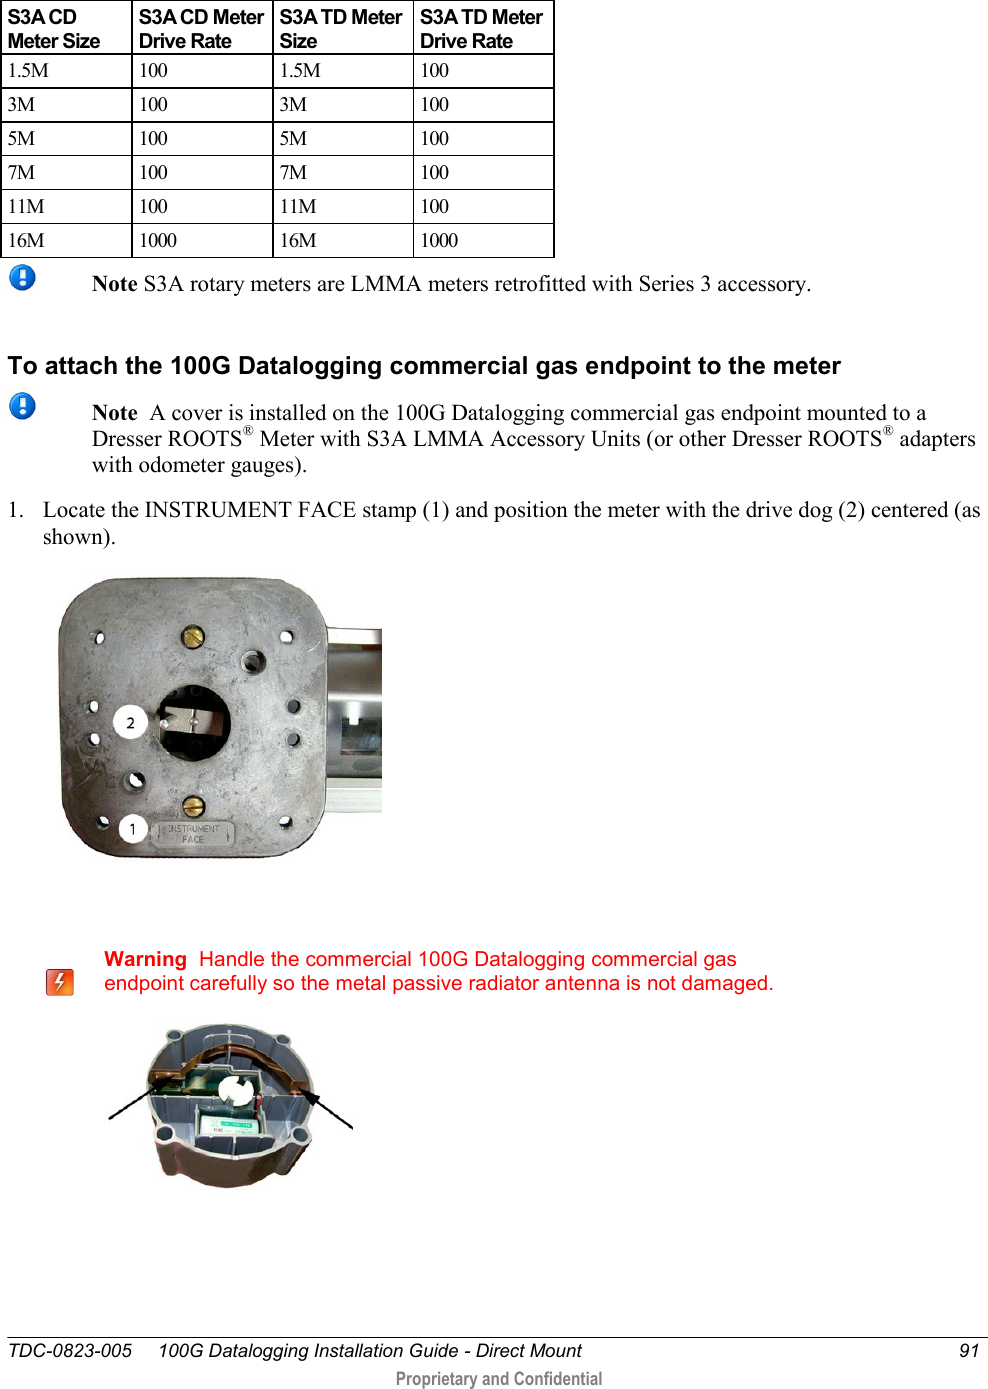  TDC-0823-005     100G Datalogging Installation Guide - Direct Mount  91   Proprietary and Confidential      S3A CD Meter Size S3A CD Meter Drive Rate S3A TD Meter Size S3A TD Meter Drive Rate 1.5M 100 1.5M 100 3M 100 3M 100 5M 100 5M 100 7M 100 7M 100 11M 100 11M 100 16M 1000 16M 1000  Note S3A rotary meters are LMMA meters retrofitted with Series 3 accessory.  To attach the 100G Datalogging commercial gas endpoint to the meter  Note  A cover is installed on the 100G Datalogging commercial gas endpoint mounted to a Dresser ROOTS® Meter with S3A LMMA Accessory Units (or other Dresser ROOTS® adapters with odometer gauges). 1. Locate the INSTRUMENT FACE stamp (1) and position the meter with the drive dog (2) centered (as shown).    Warning  Handle the commercial 100G Datalogging commercial gas endpoint carefully so the metal passive radiator antenna is not damaged.  